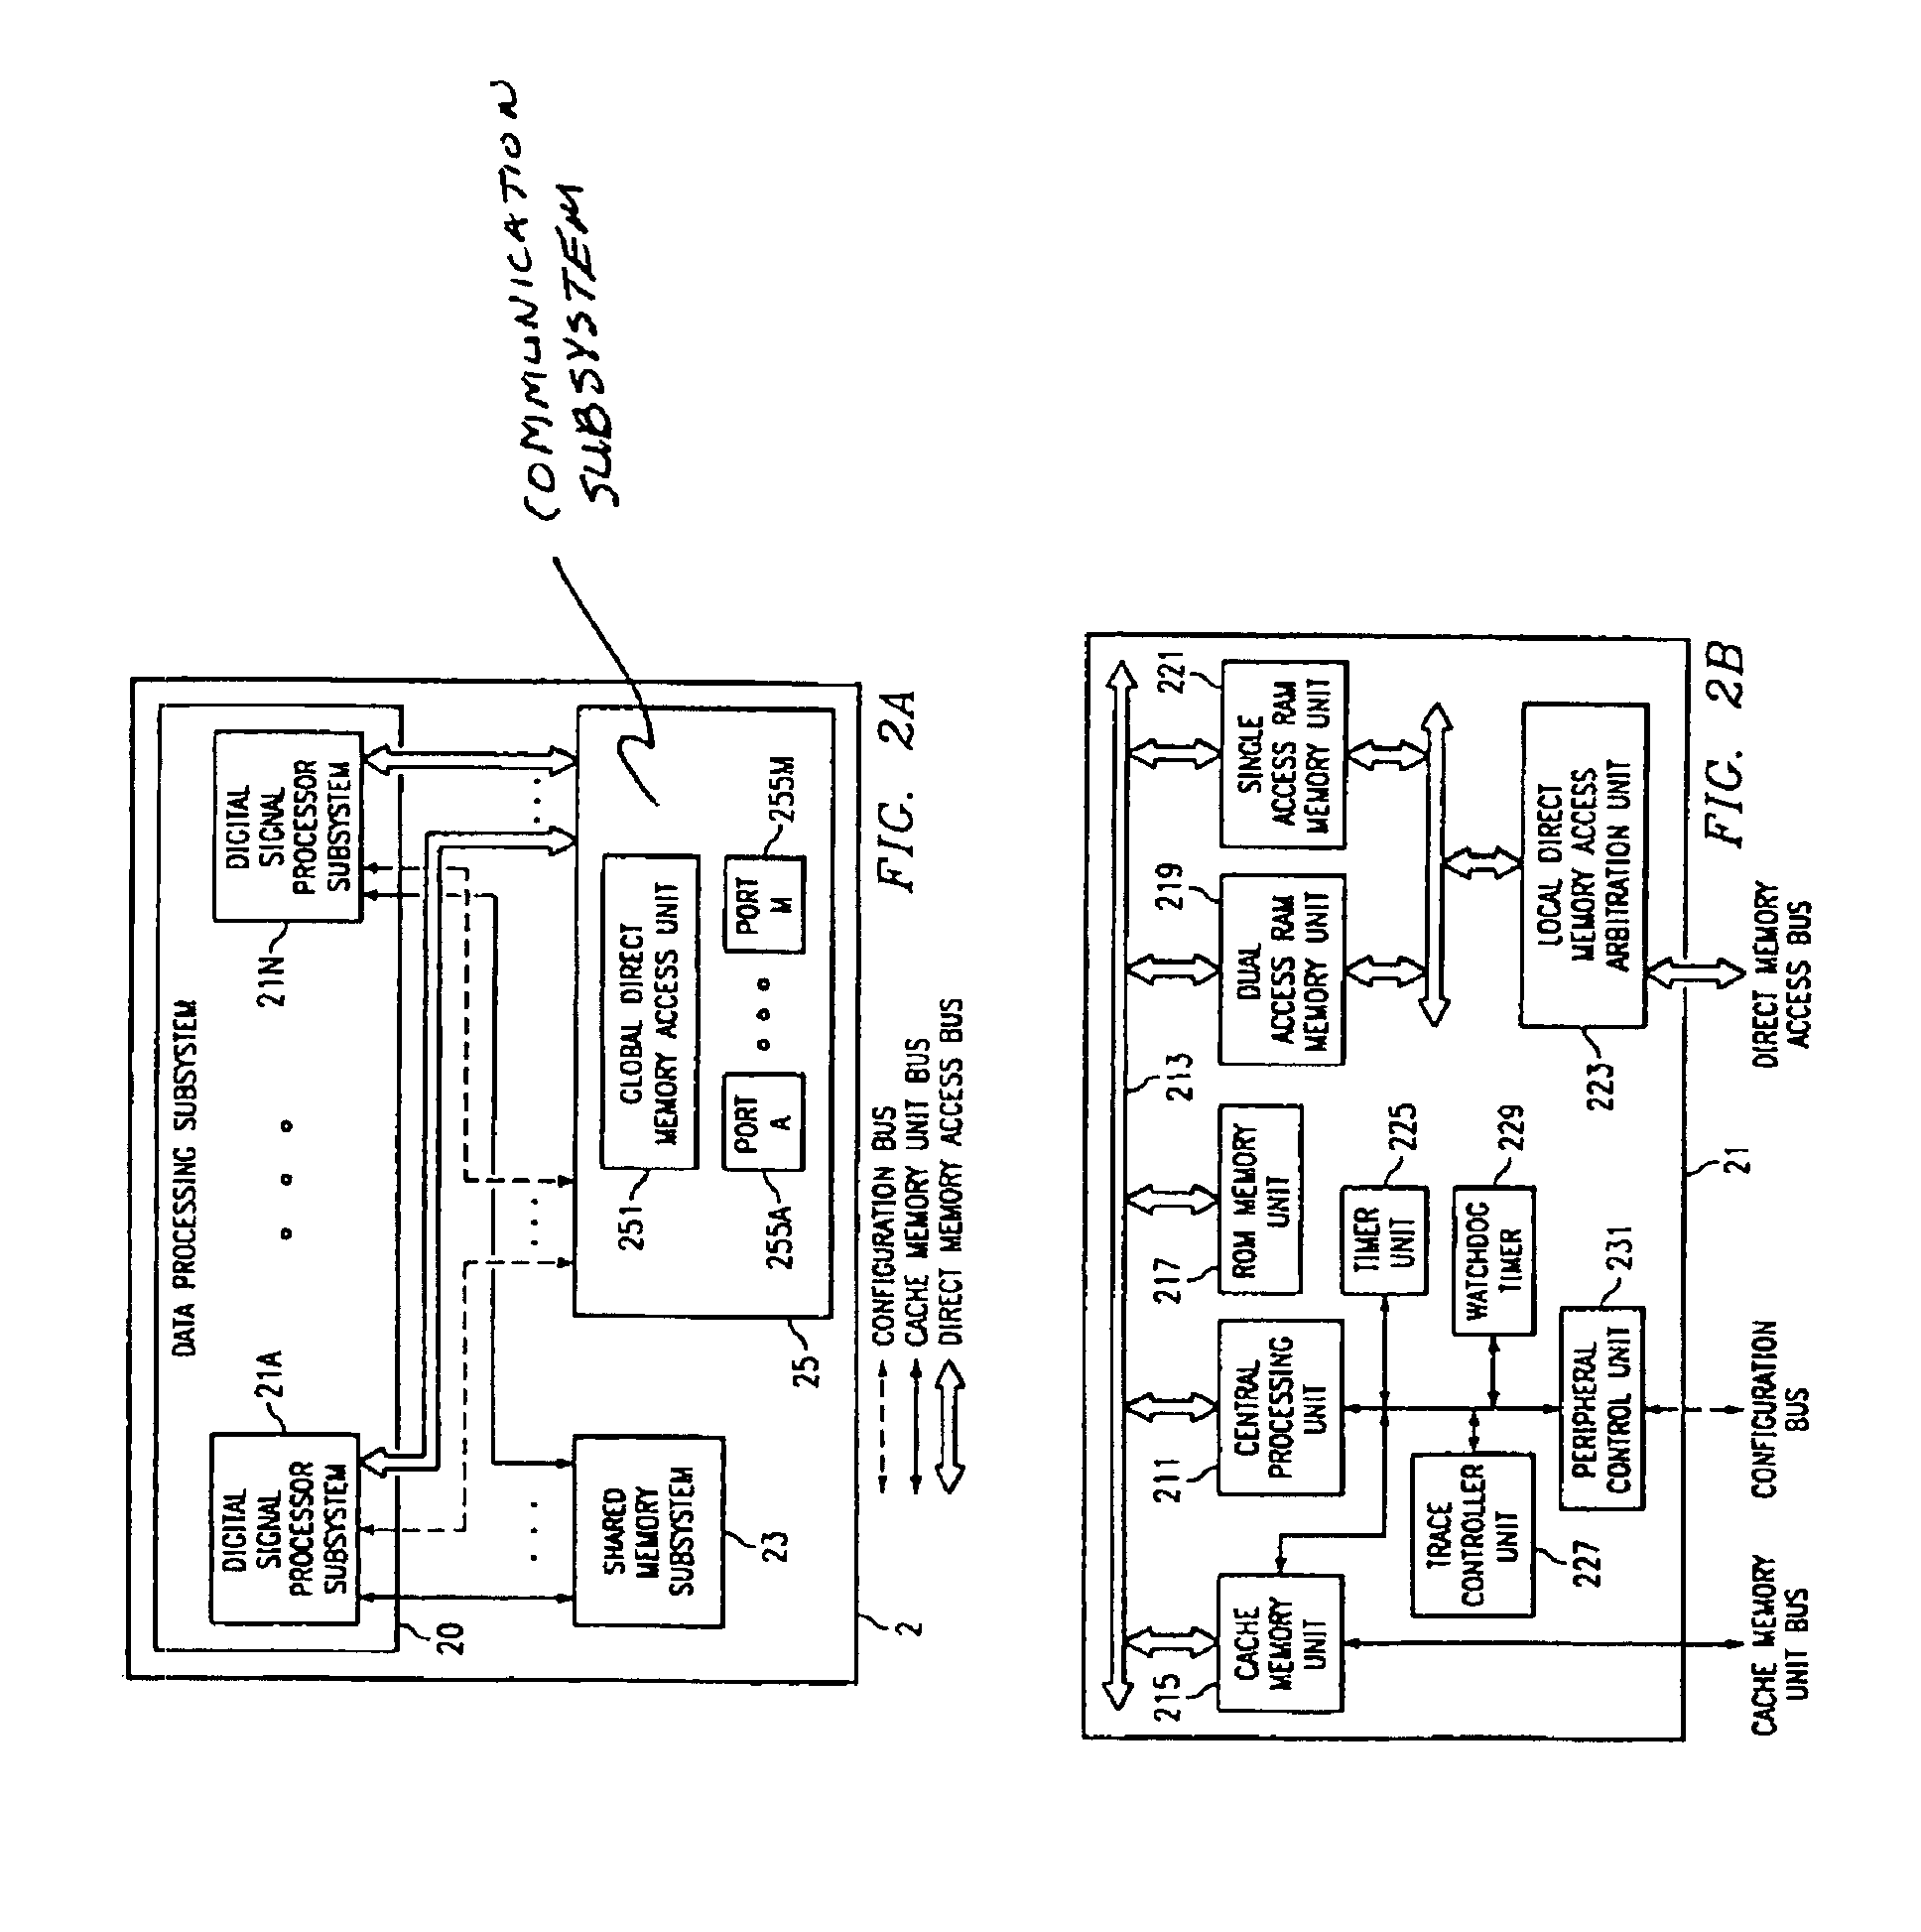 Apparatus and method for responding to a interruption of a packet flow to a high level data link controller in a signal processing system